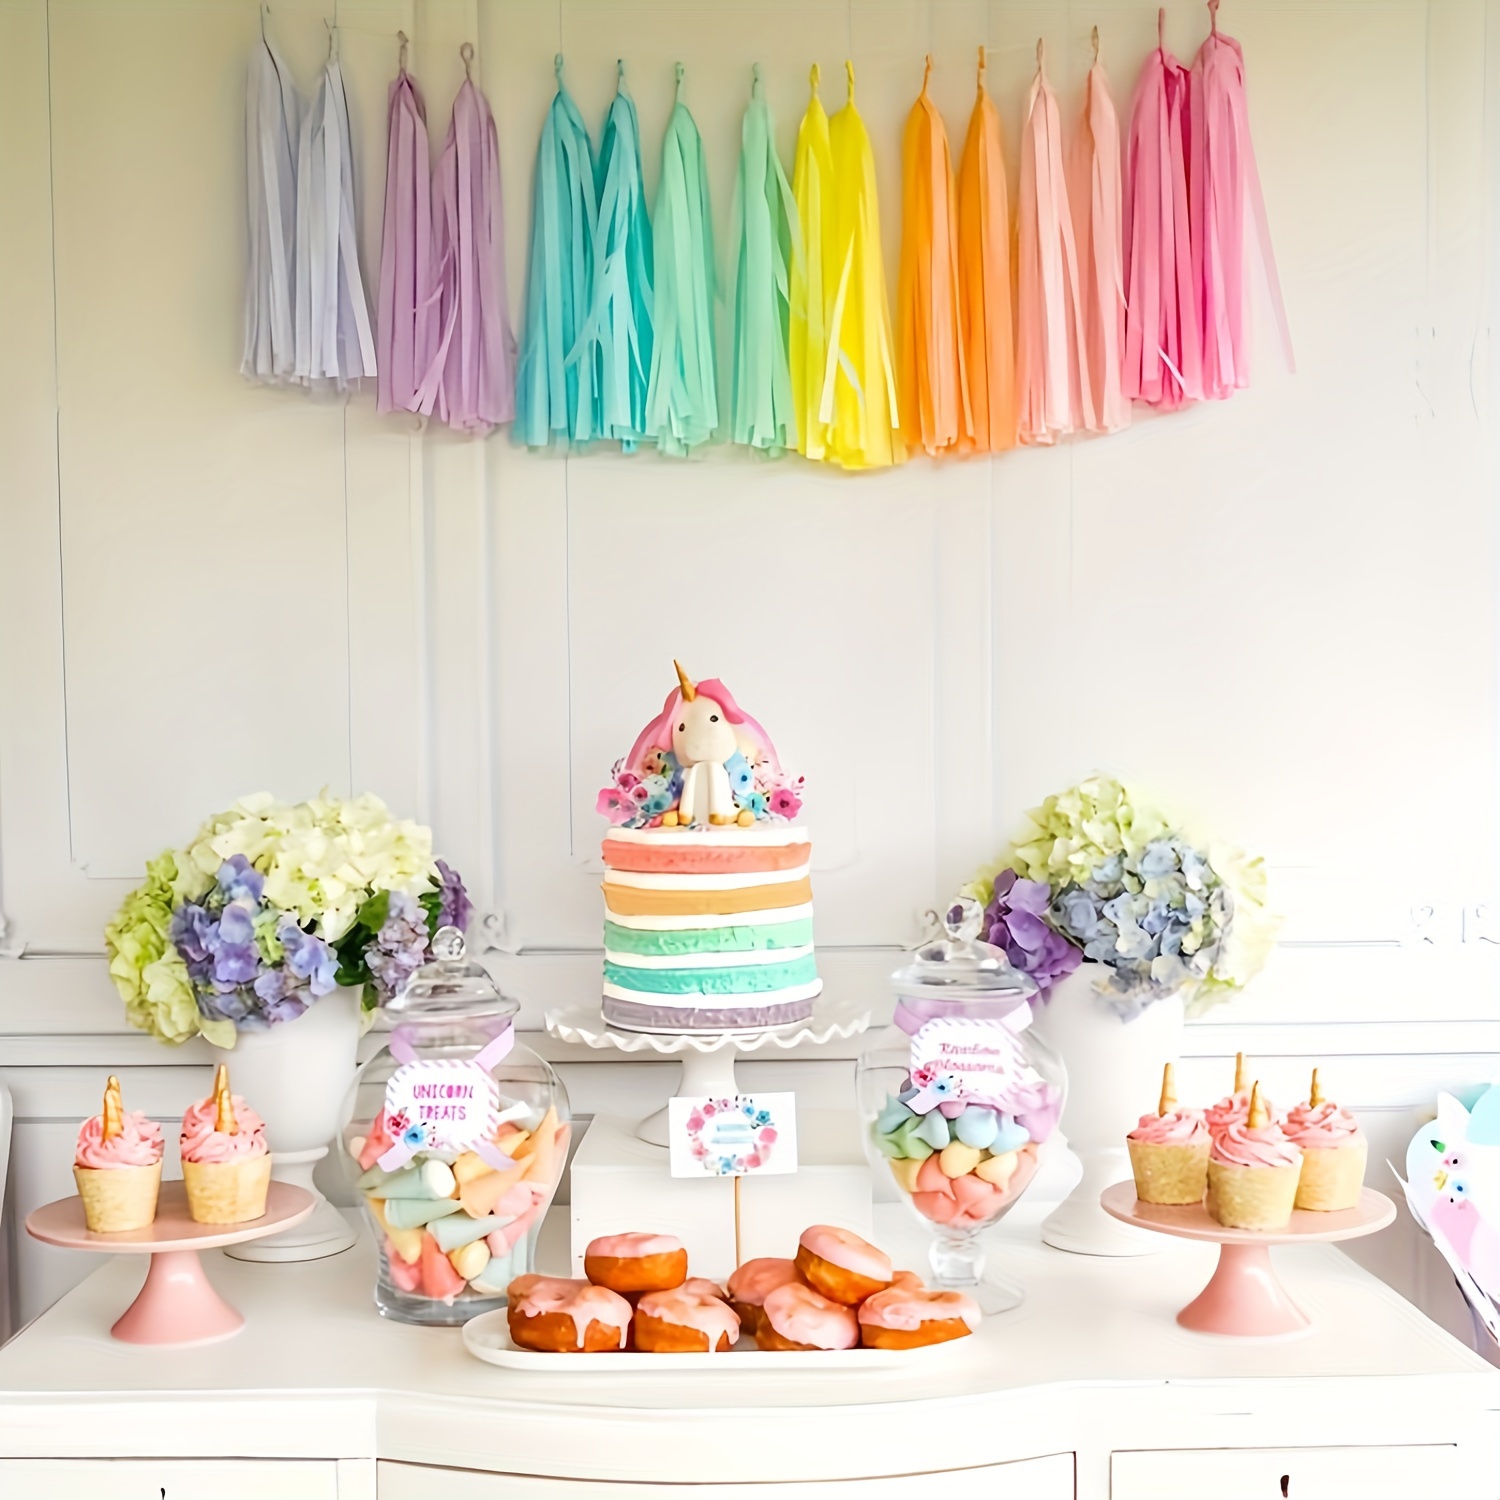 

Pastel Rainbow Assembled Versatile And Reusable Tissue Paper Tassels Garland For Party Wedding Birthday Event Celebration Decor (16 Paper Tassels+1 Rope) Easter Gift